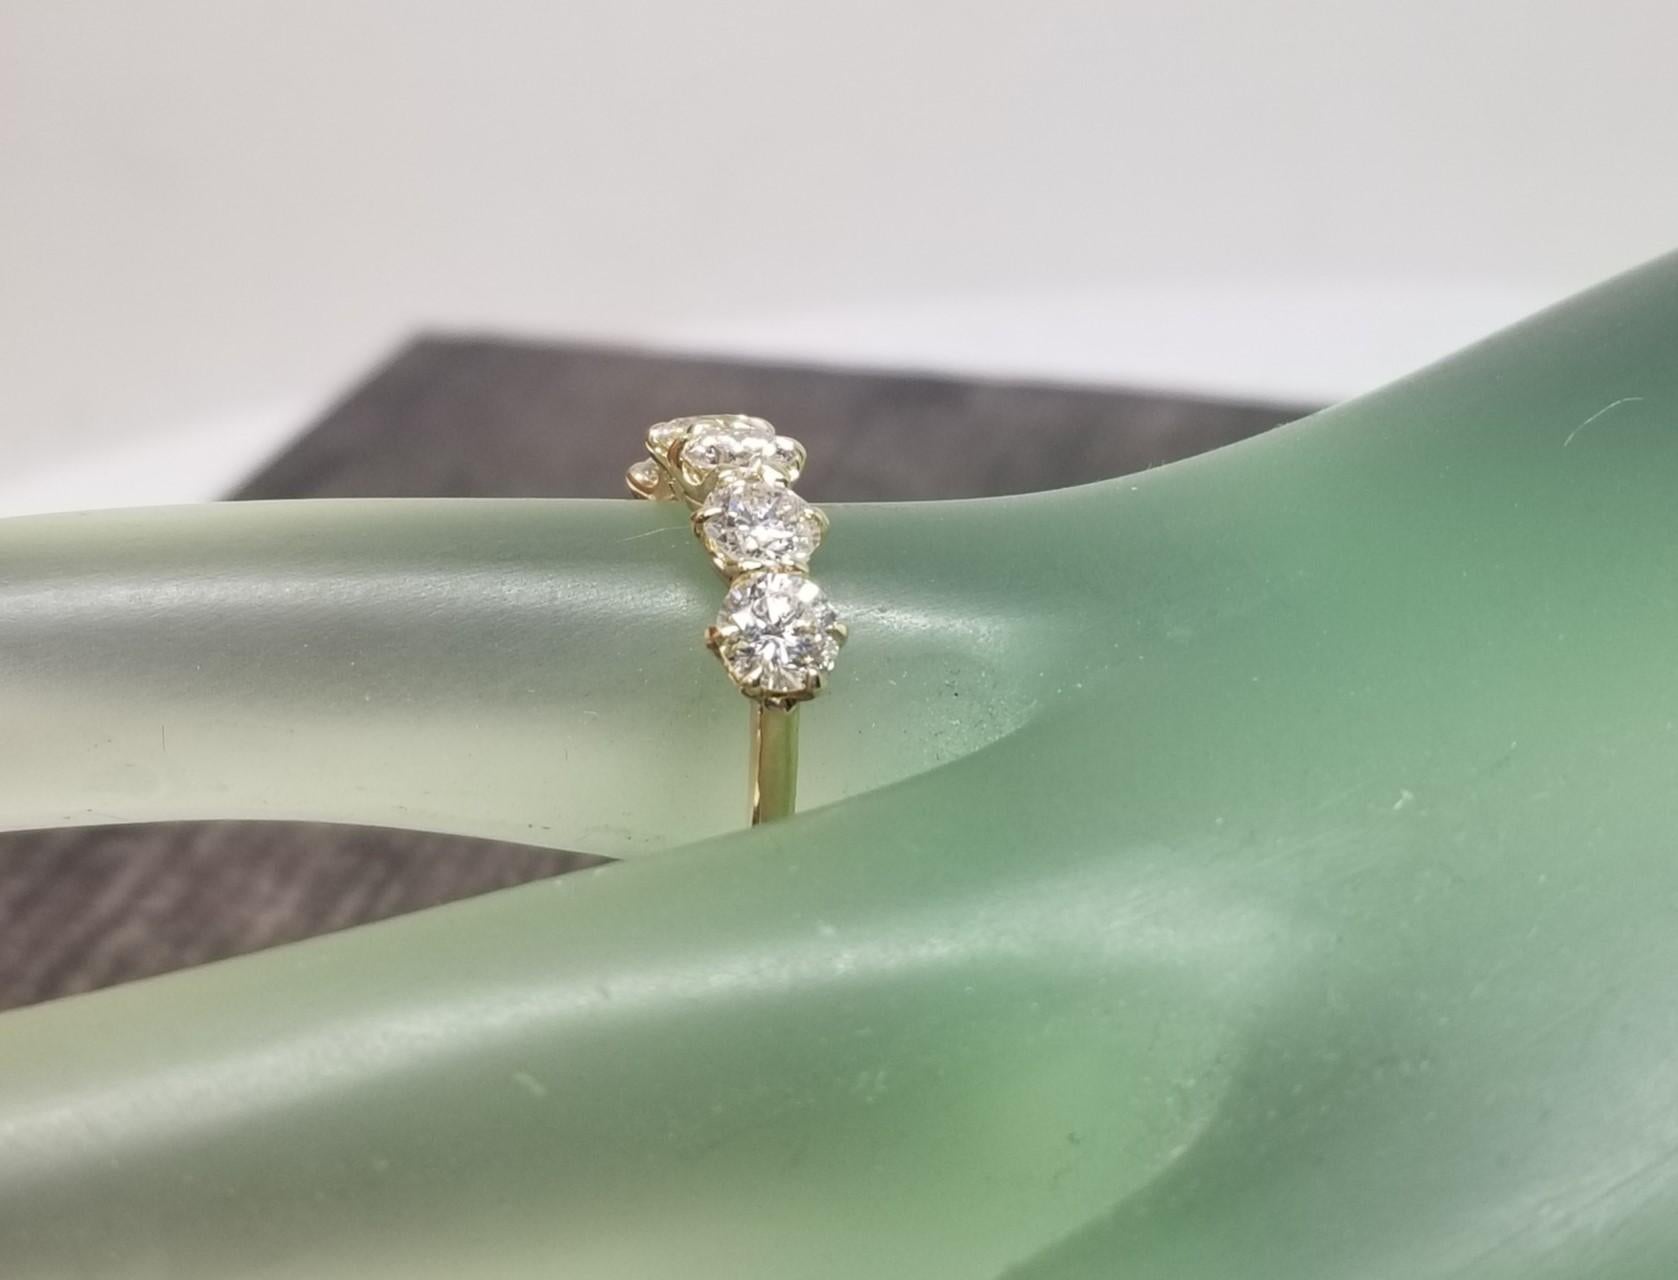 Vintage inspired 14k yellow gold 5-Stone Brilliant Cut Diamond Ring 1.65cts. For Sale 1